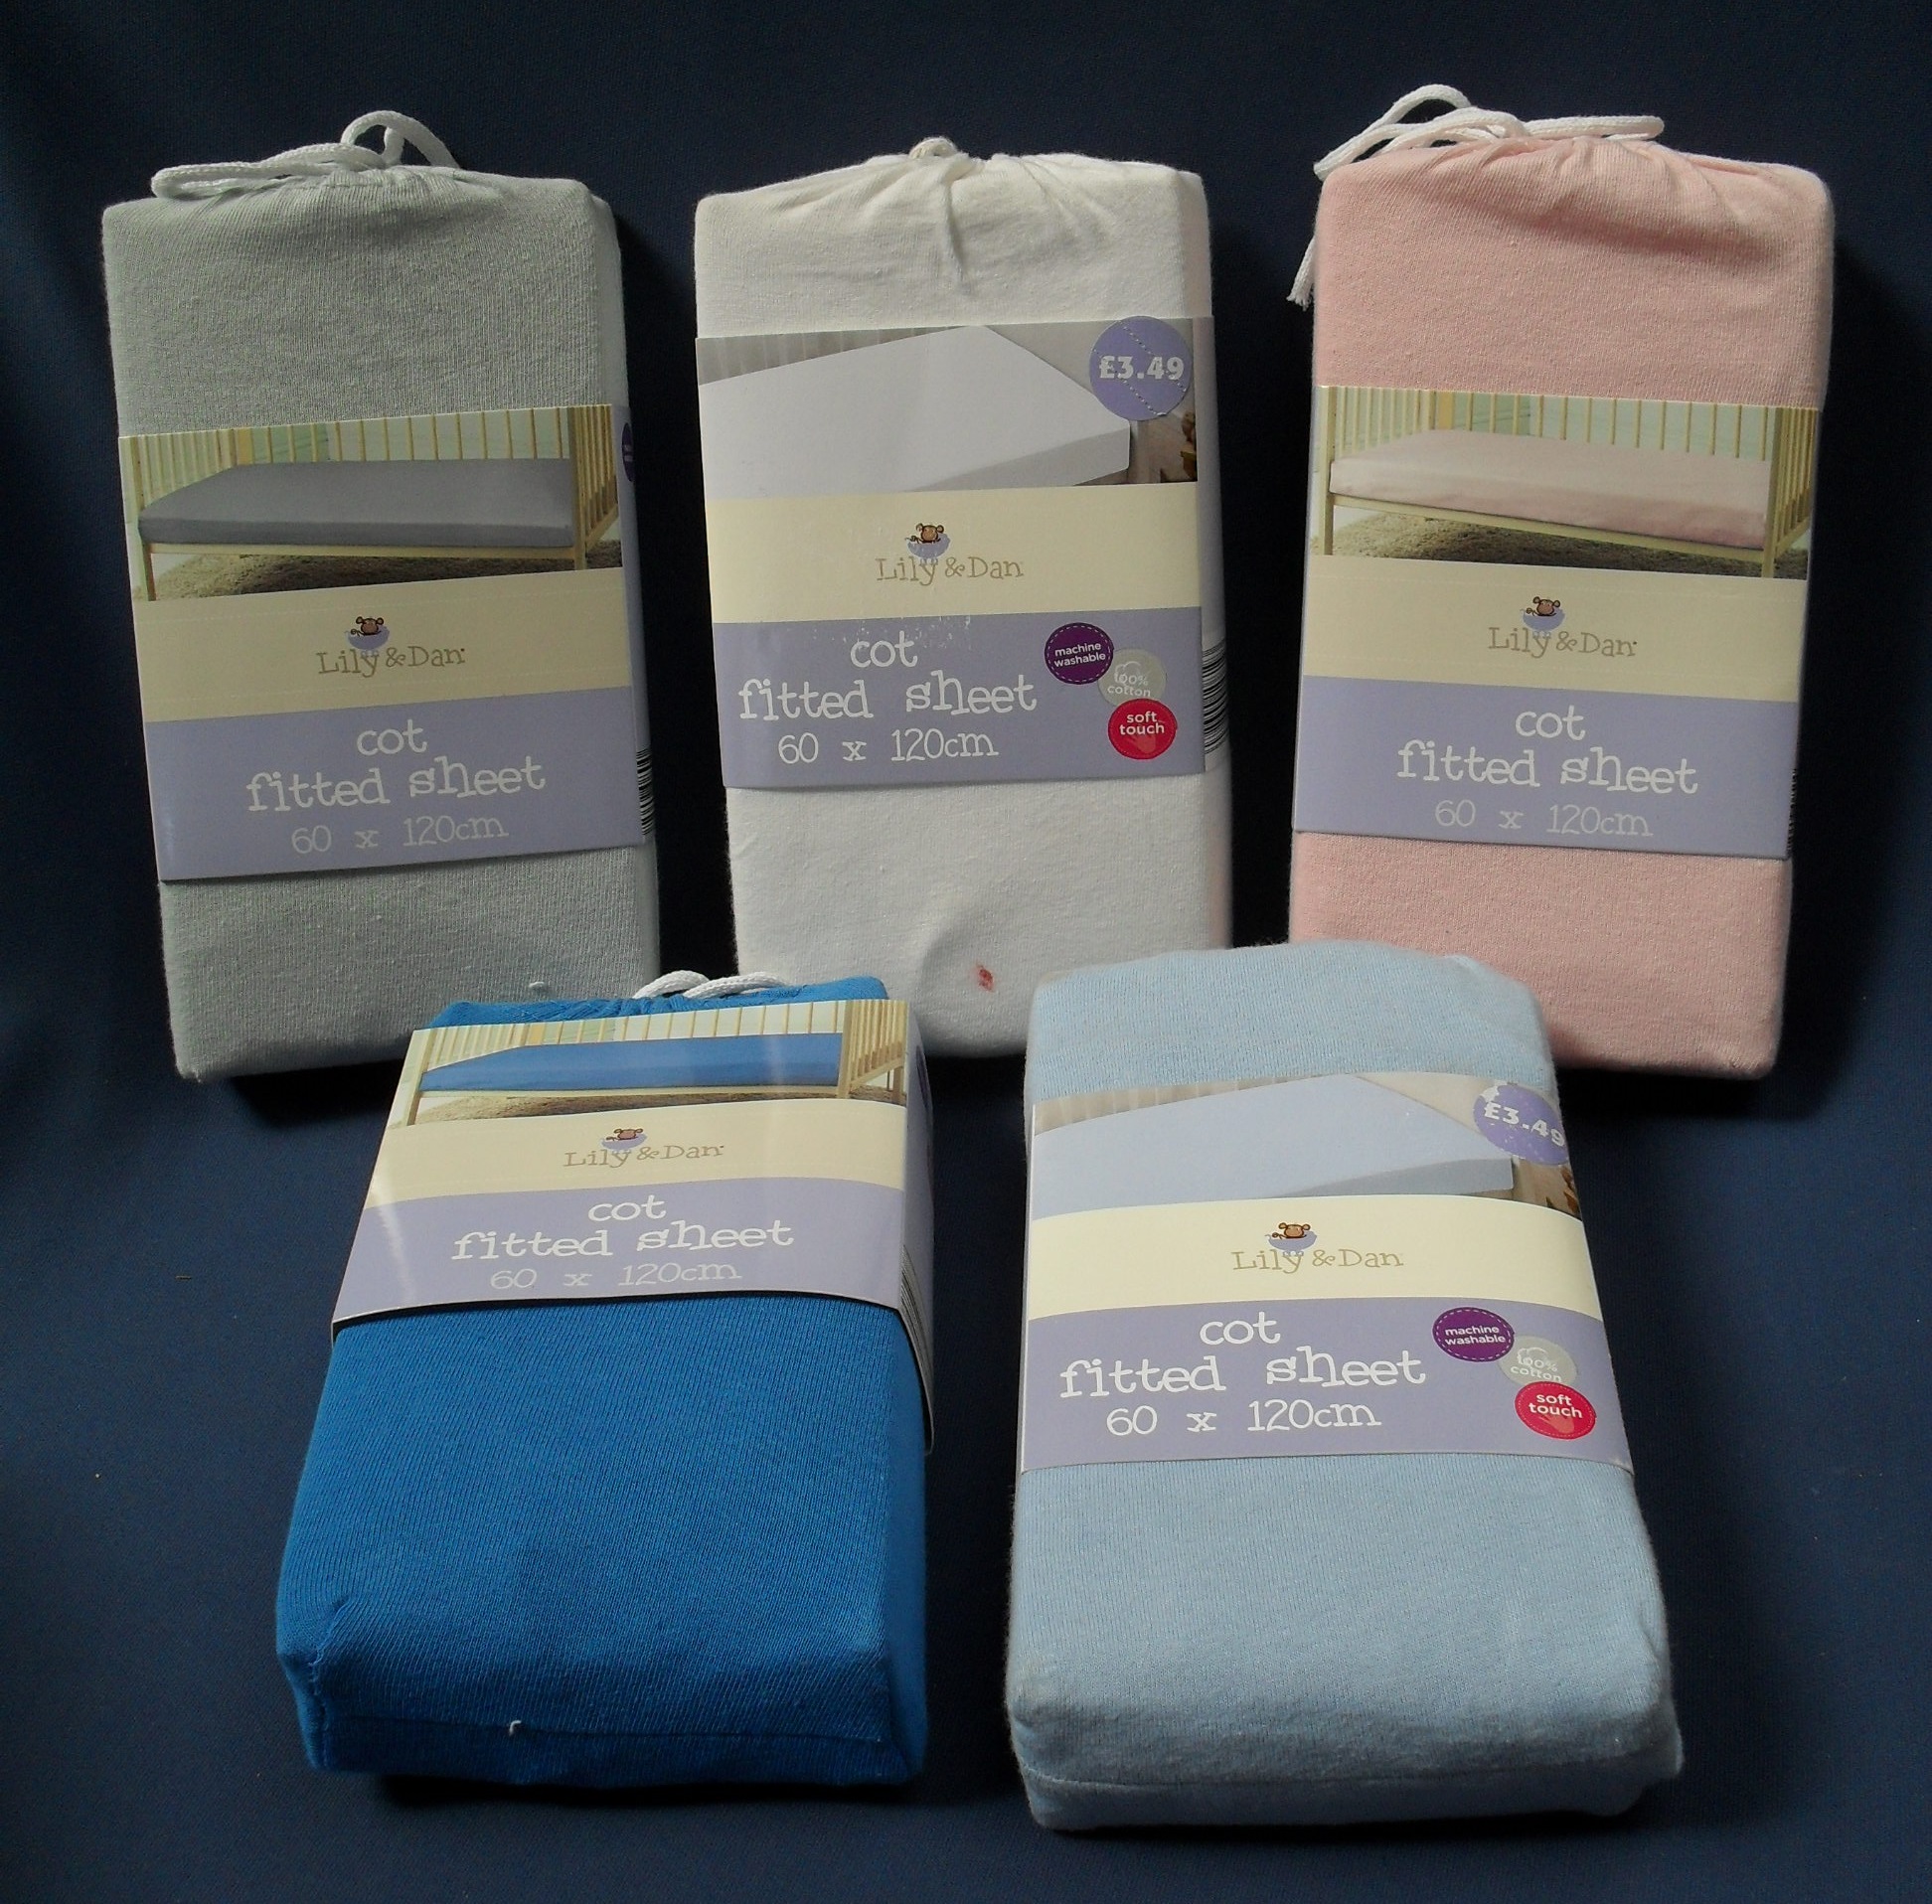 george travel cot sheets